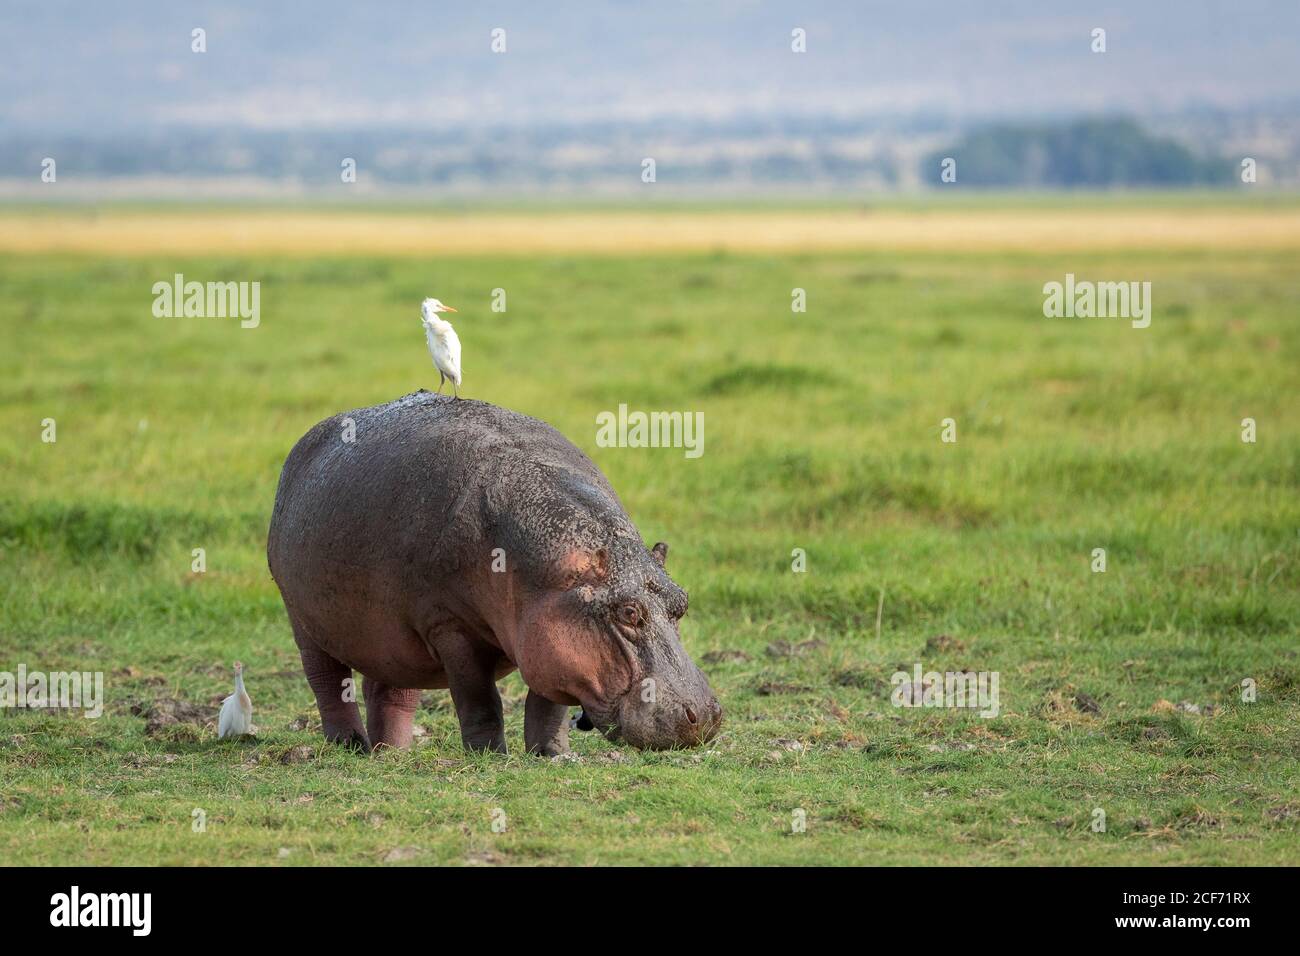 Adult hippo eating grass in vast open plains of Amboseli National Park in Kenya Stock Photo